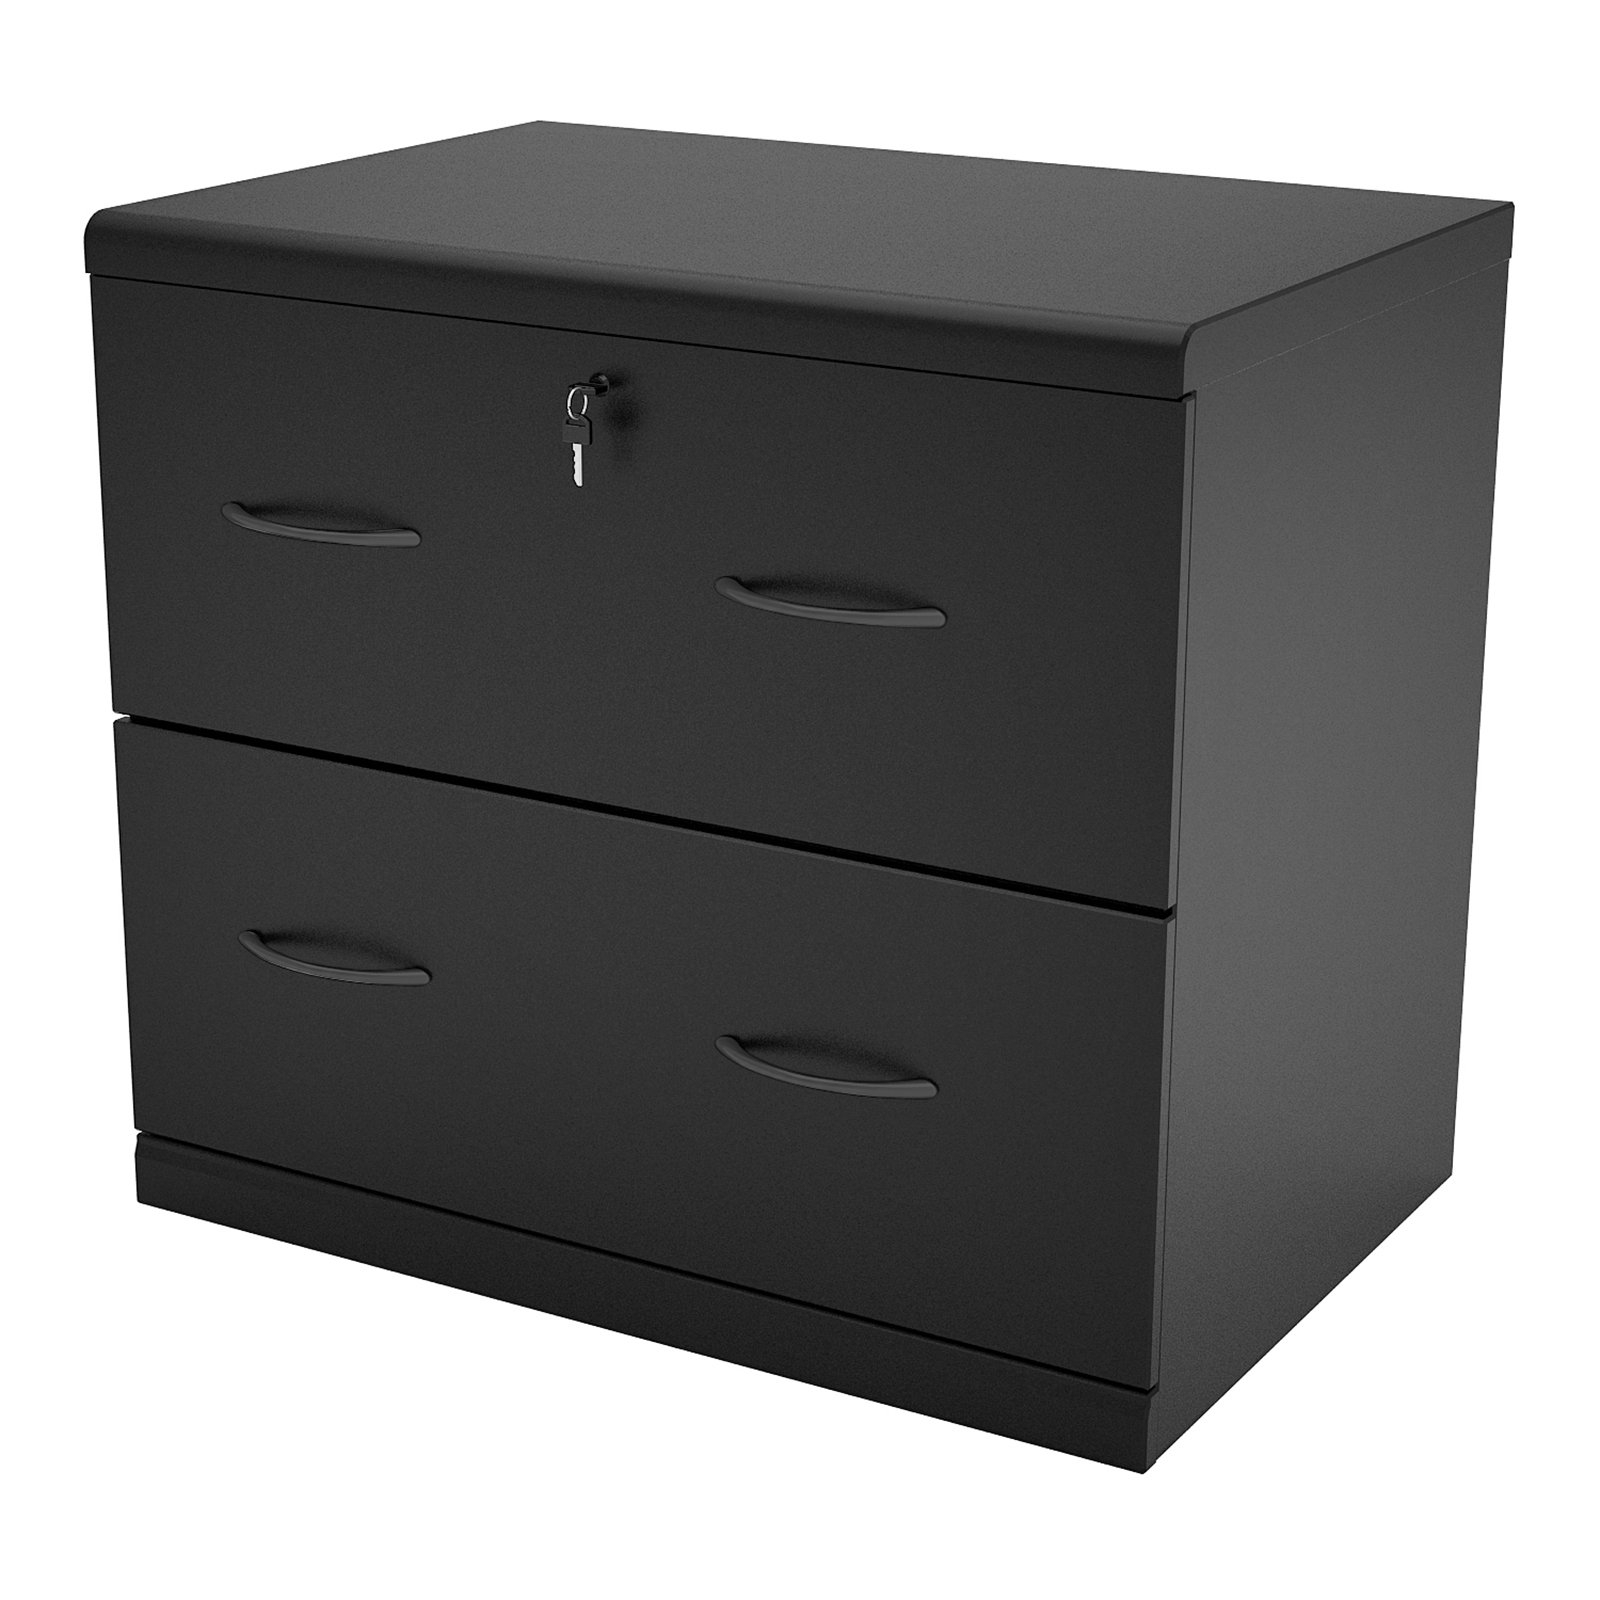 2 Drawer Lateral Wood Lockable Filing Cabinet Black Walmart with regard to proportions 1600 X 1600